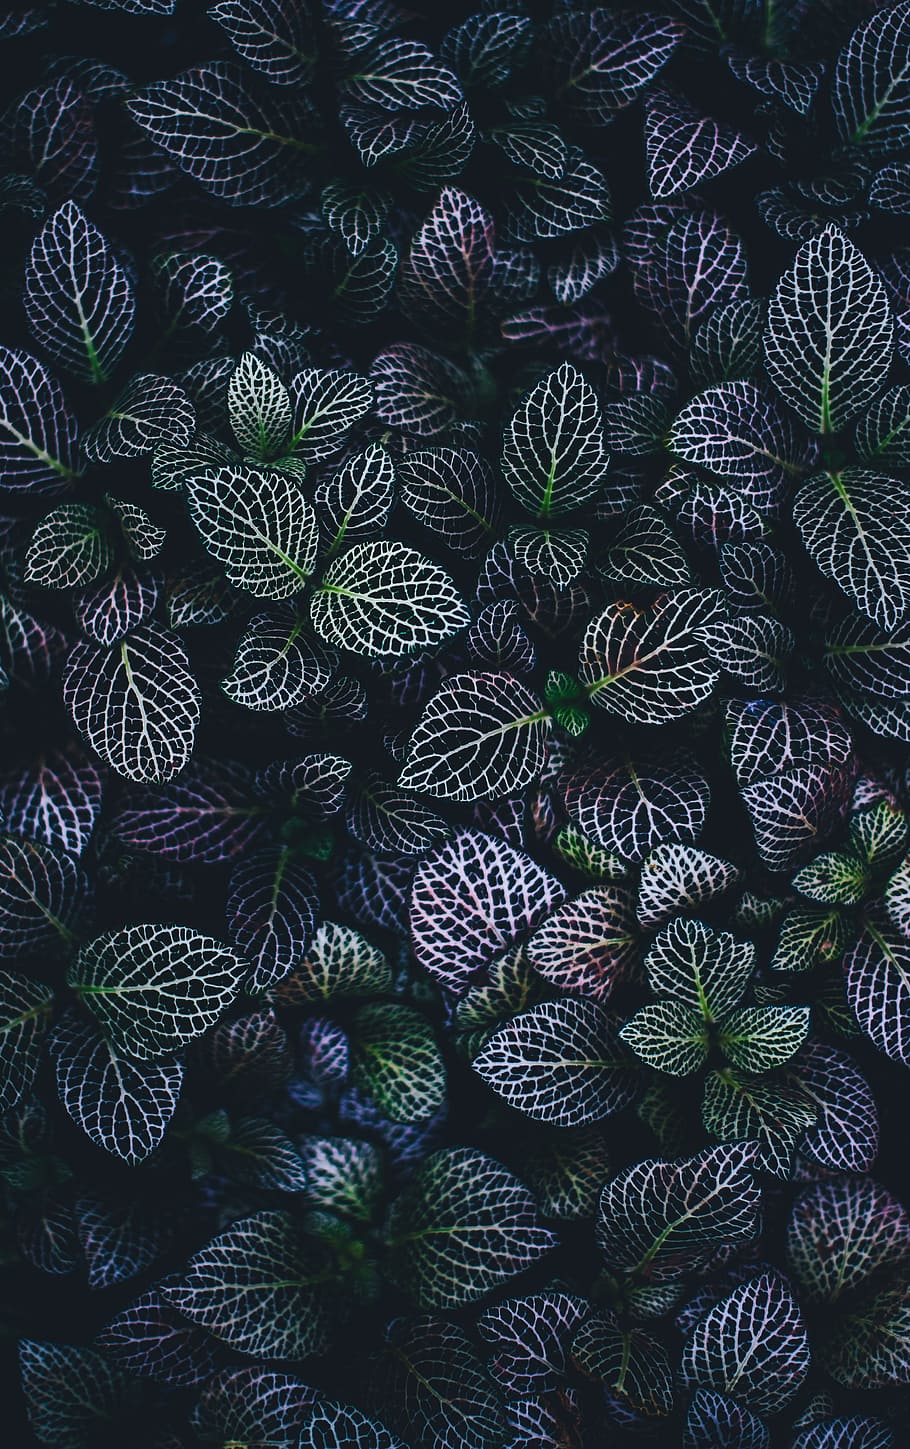 HD wallpaper: green and blue leaves plants, purple, green, and bnlue leafed plants  illustration | Wallpaper Flare